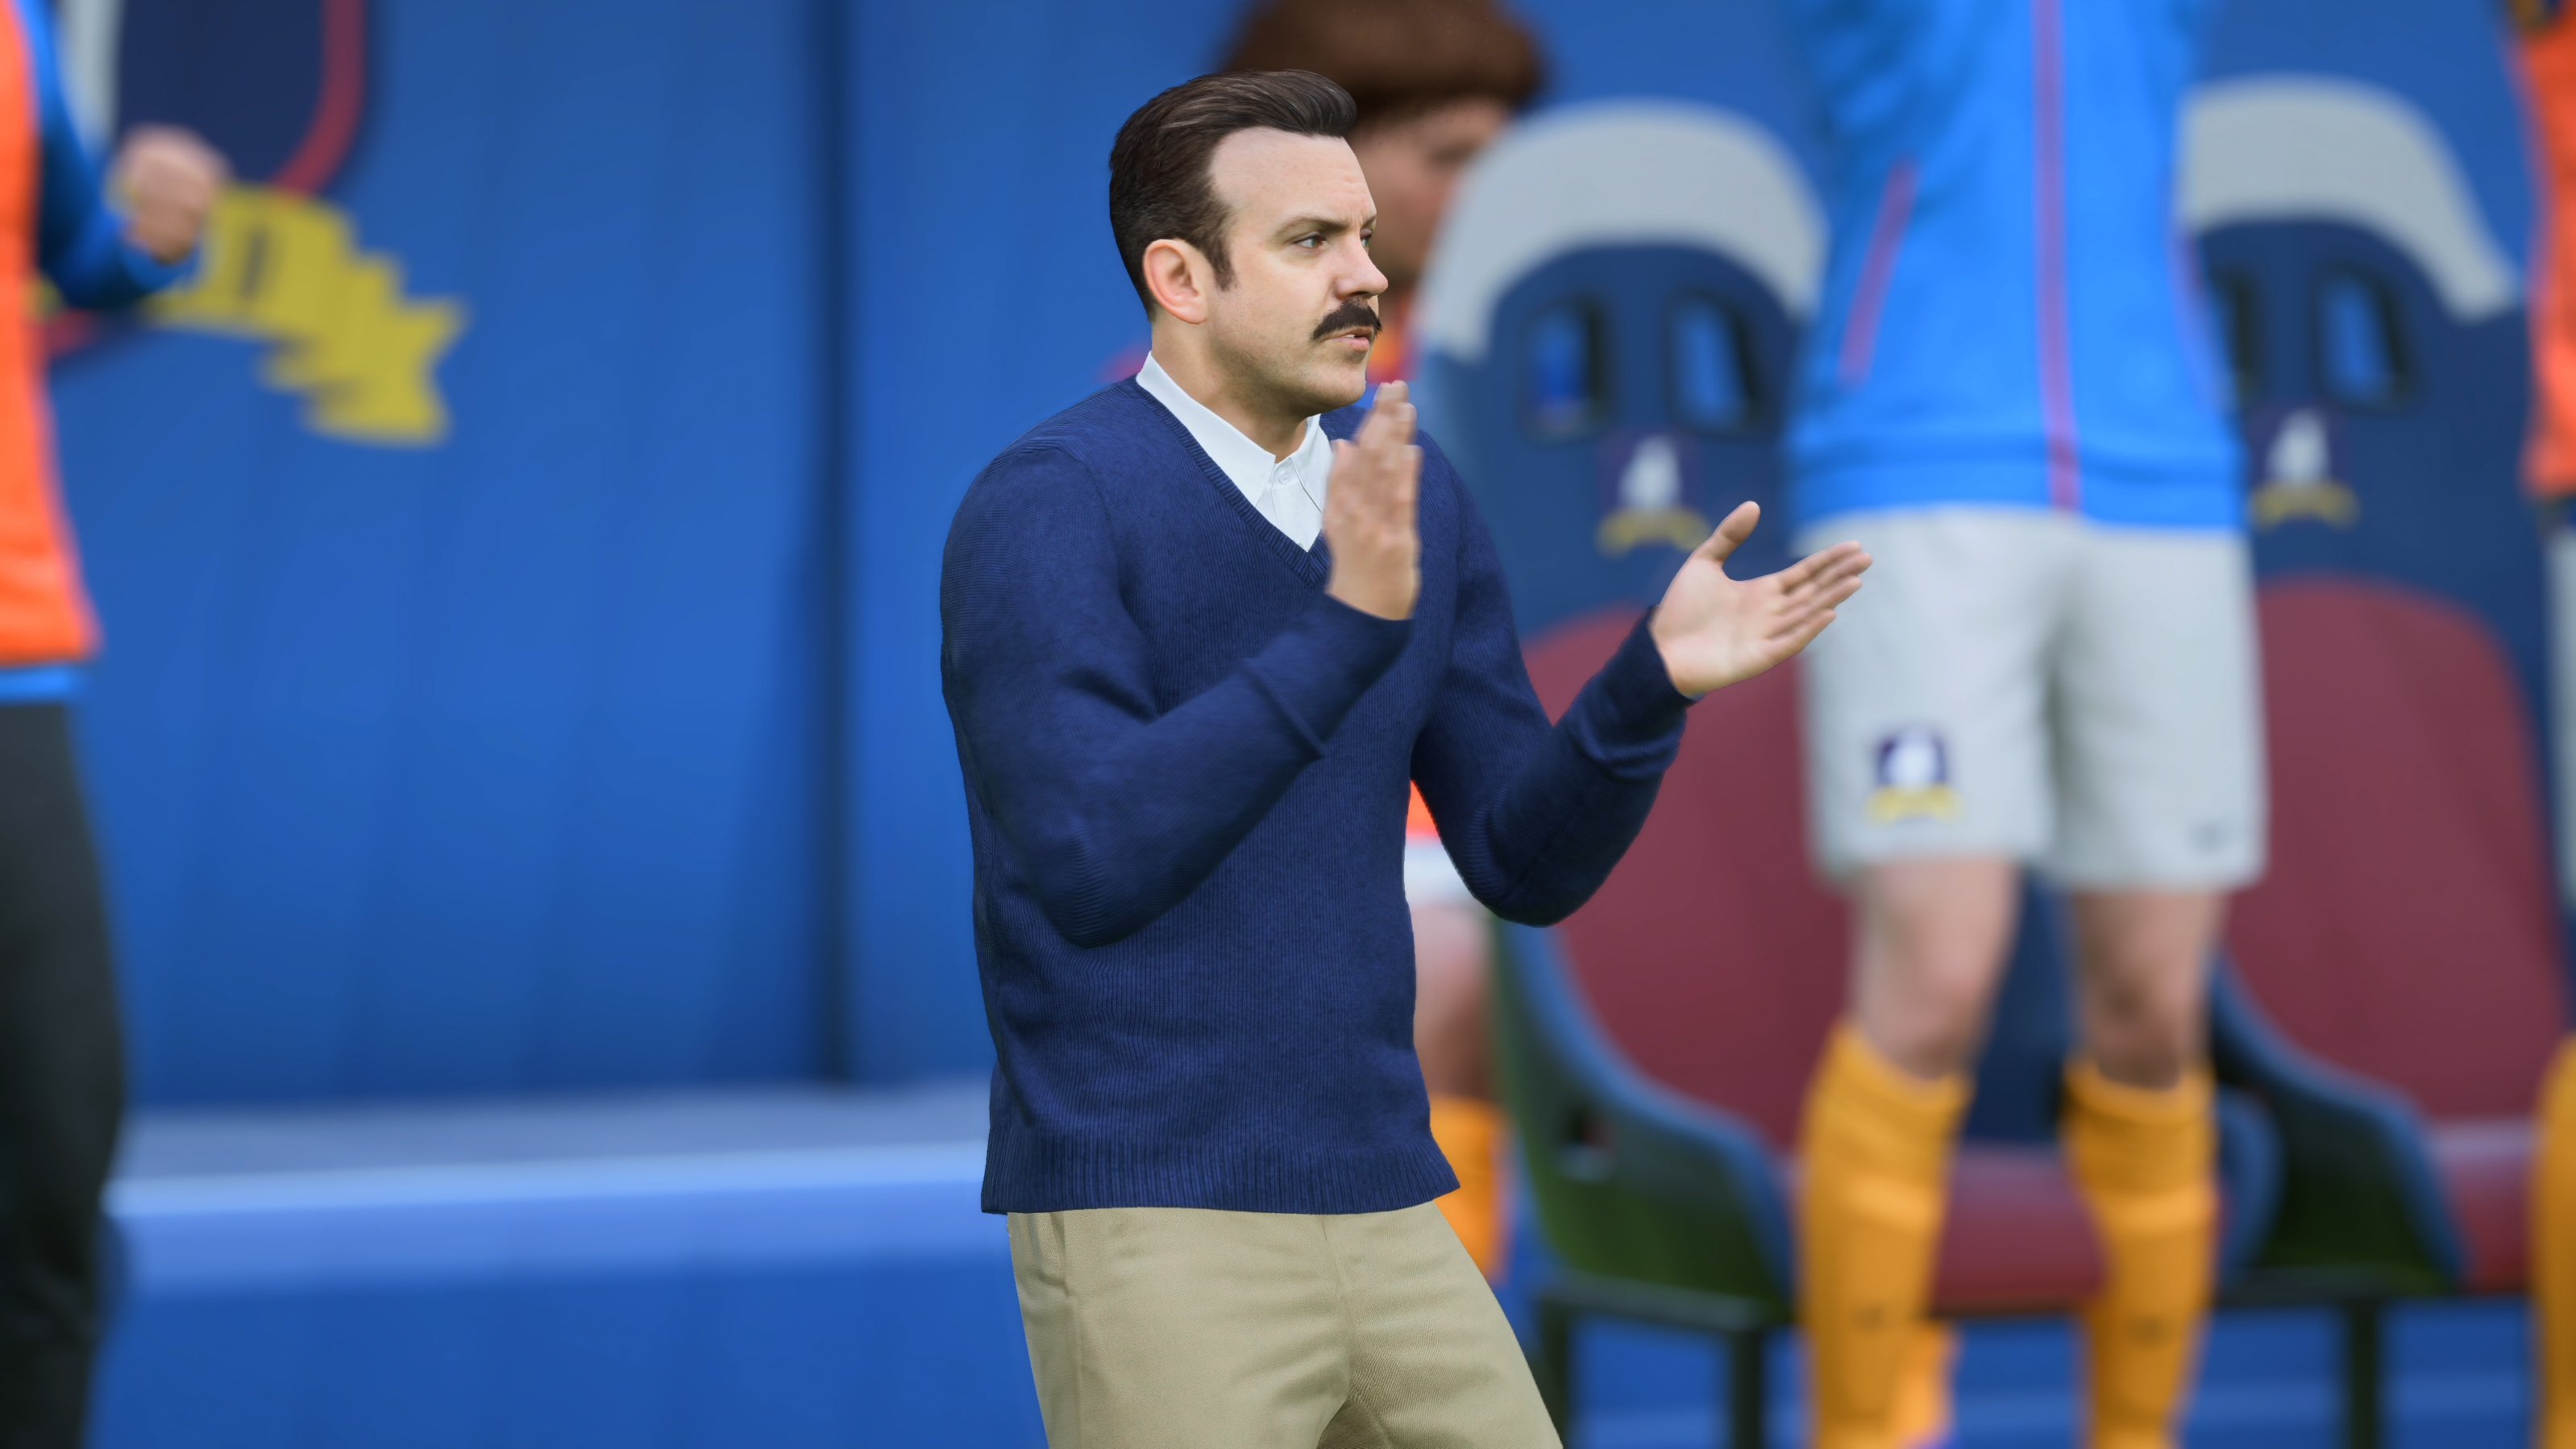 FIFA 18 easter eggs: Five hidden quirks you might not have noticed